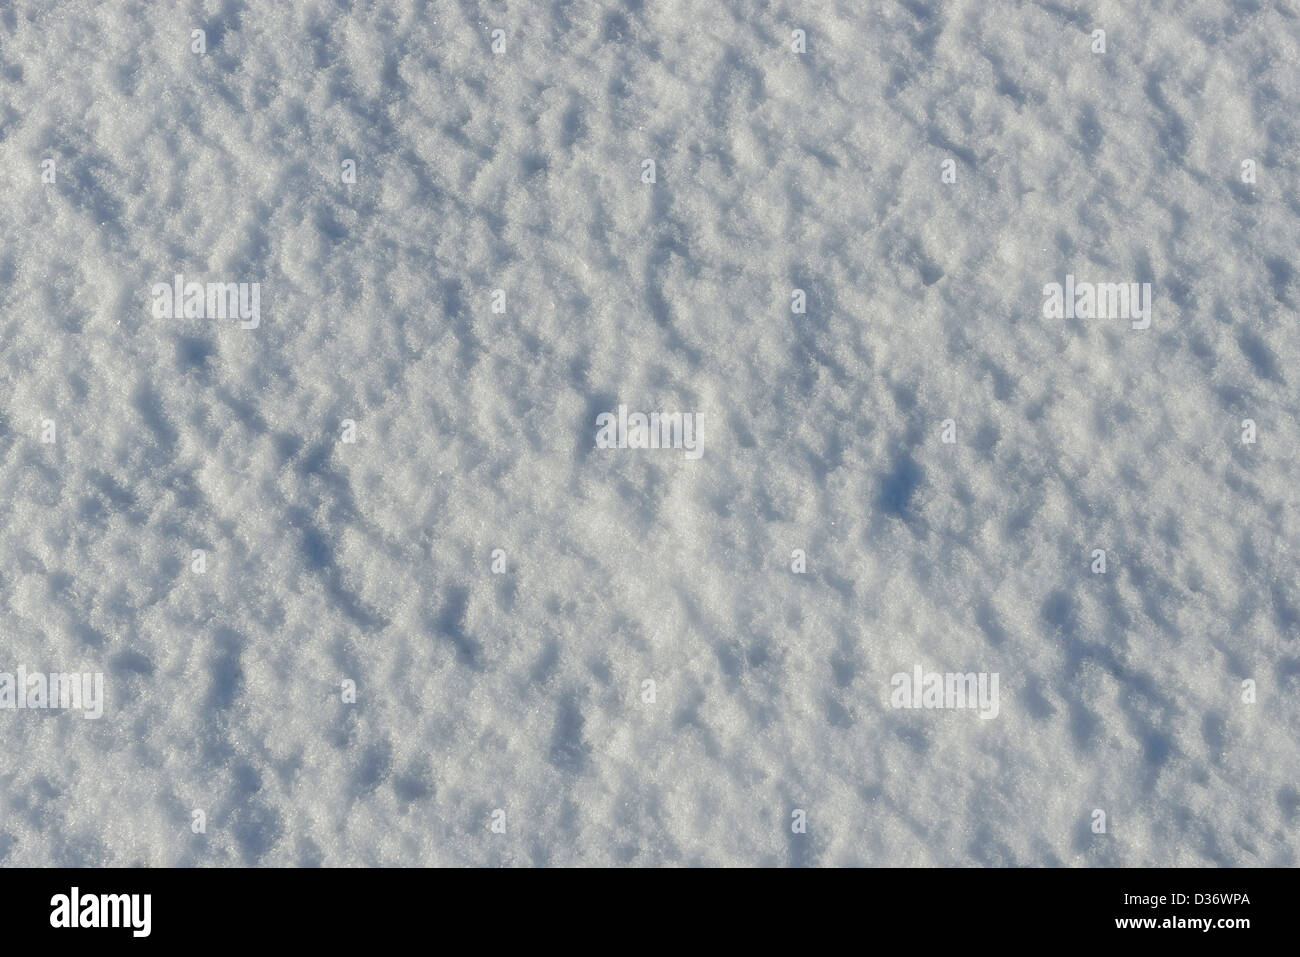 Abstract pattern of fresh snow Stock Photo